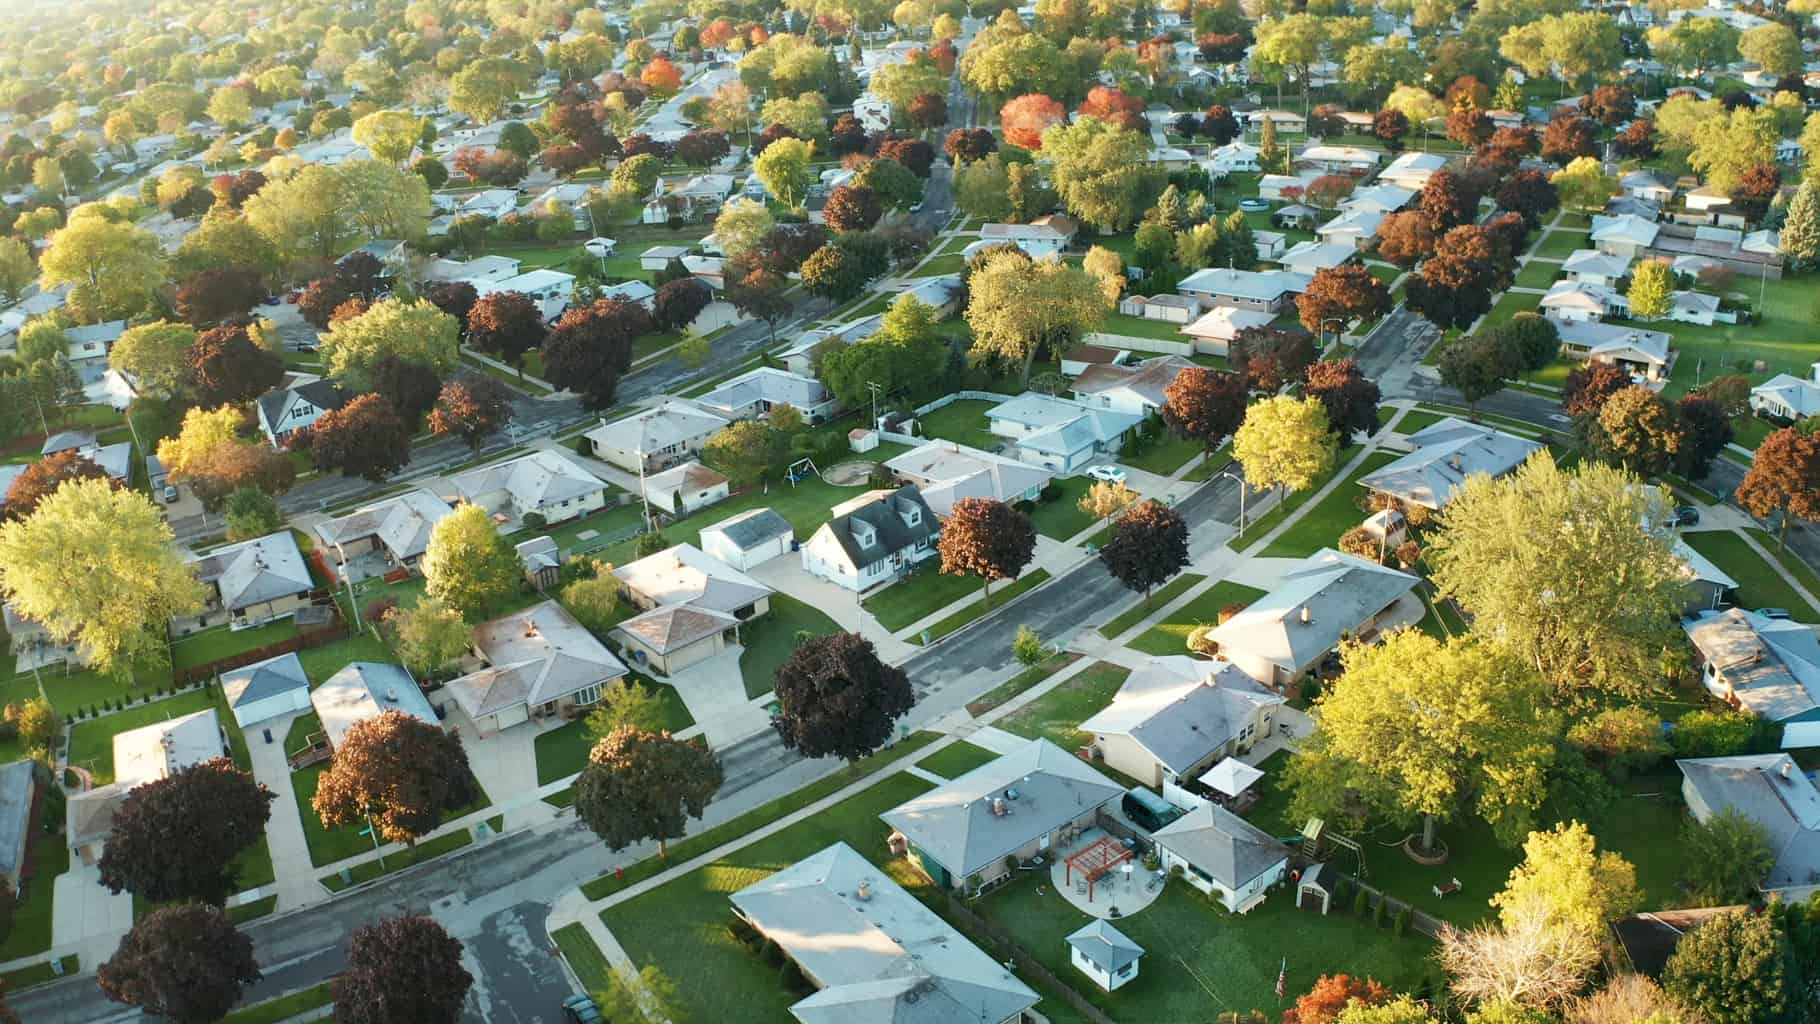 Aerial view of residential houses at autumn (october). American